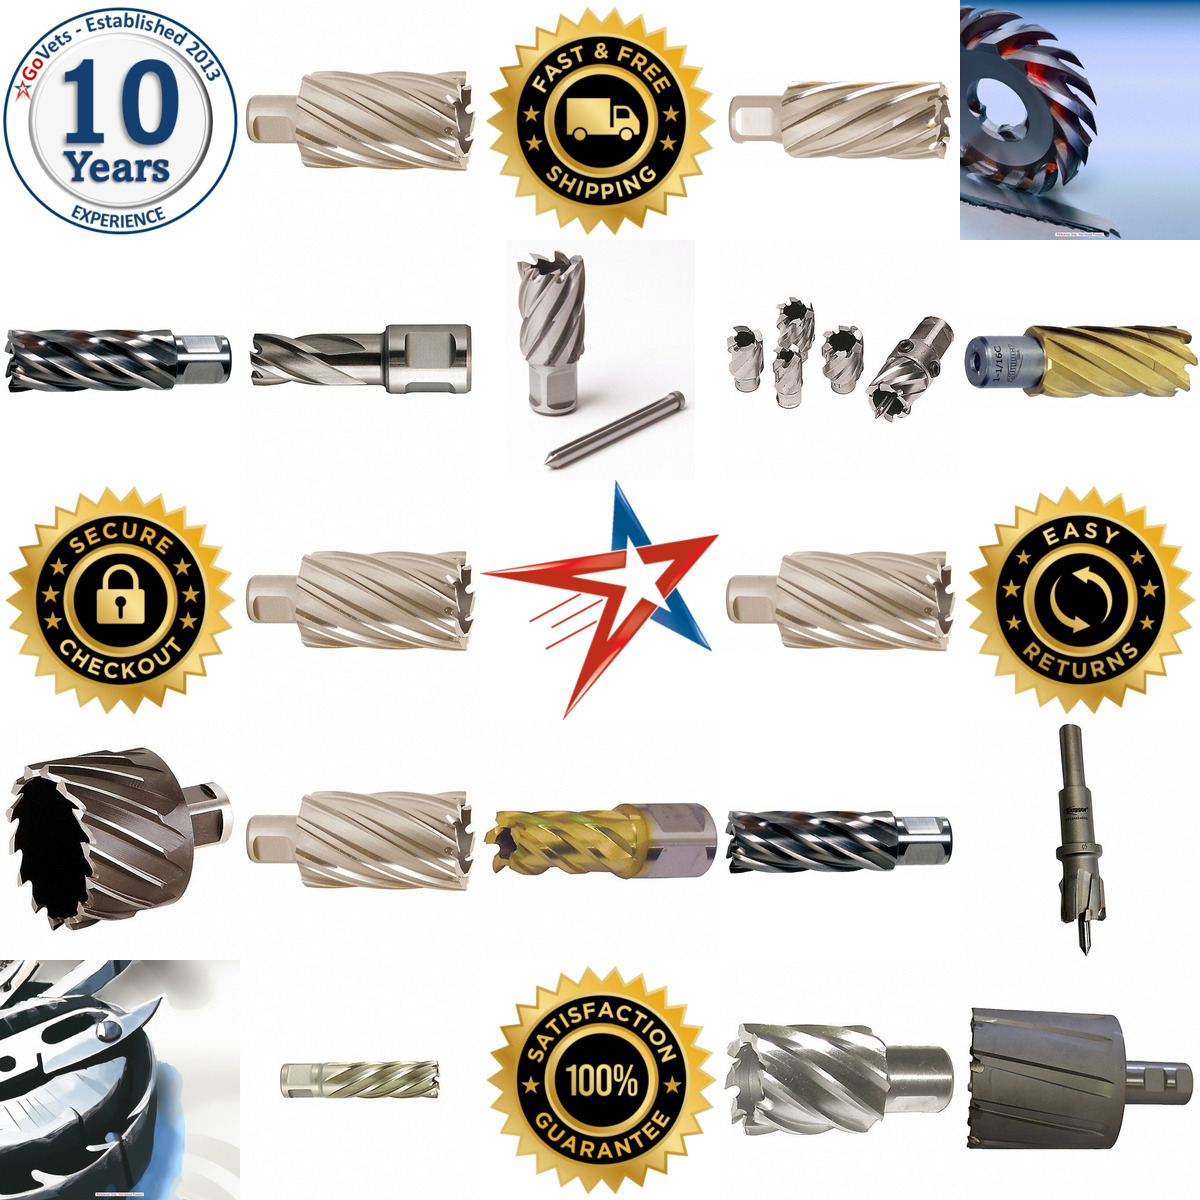 A selection of Annular Cutters products on GoVets